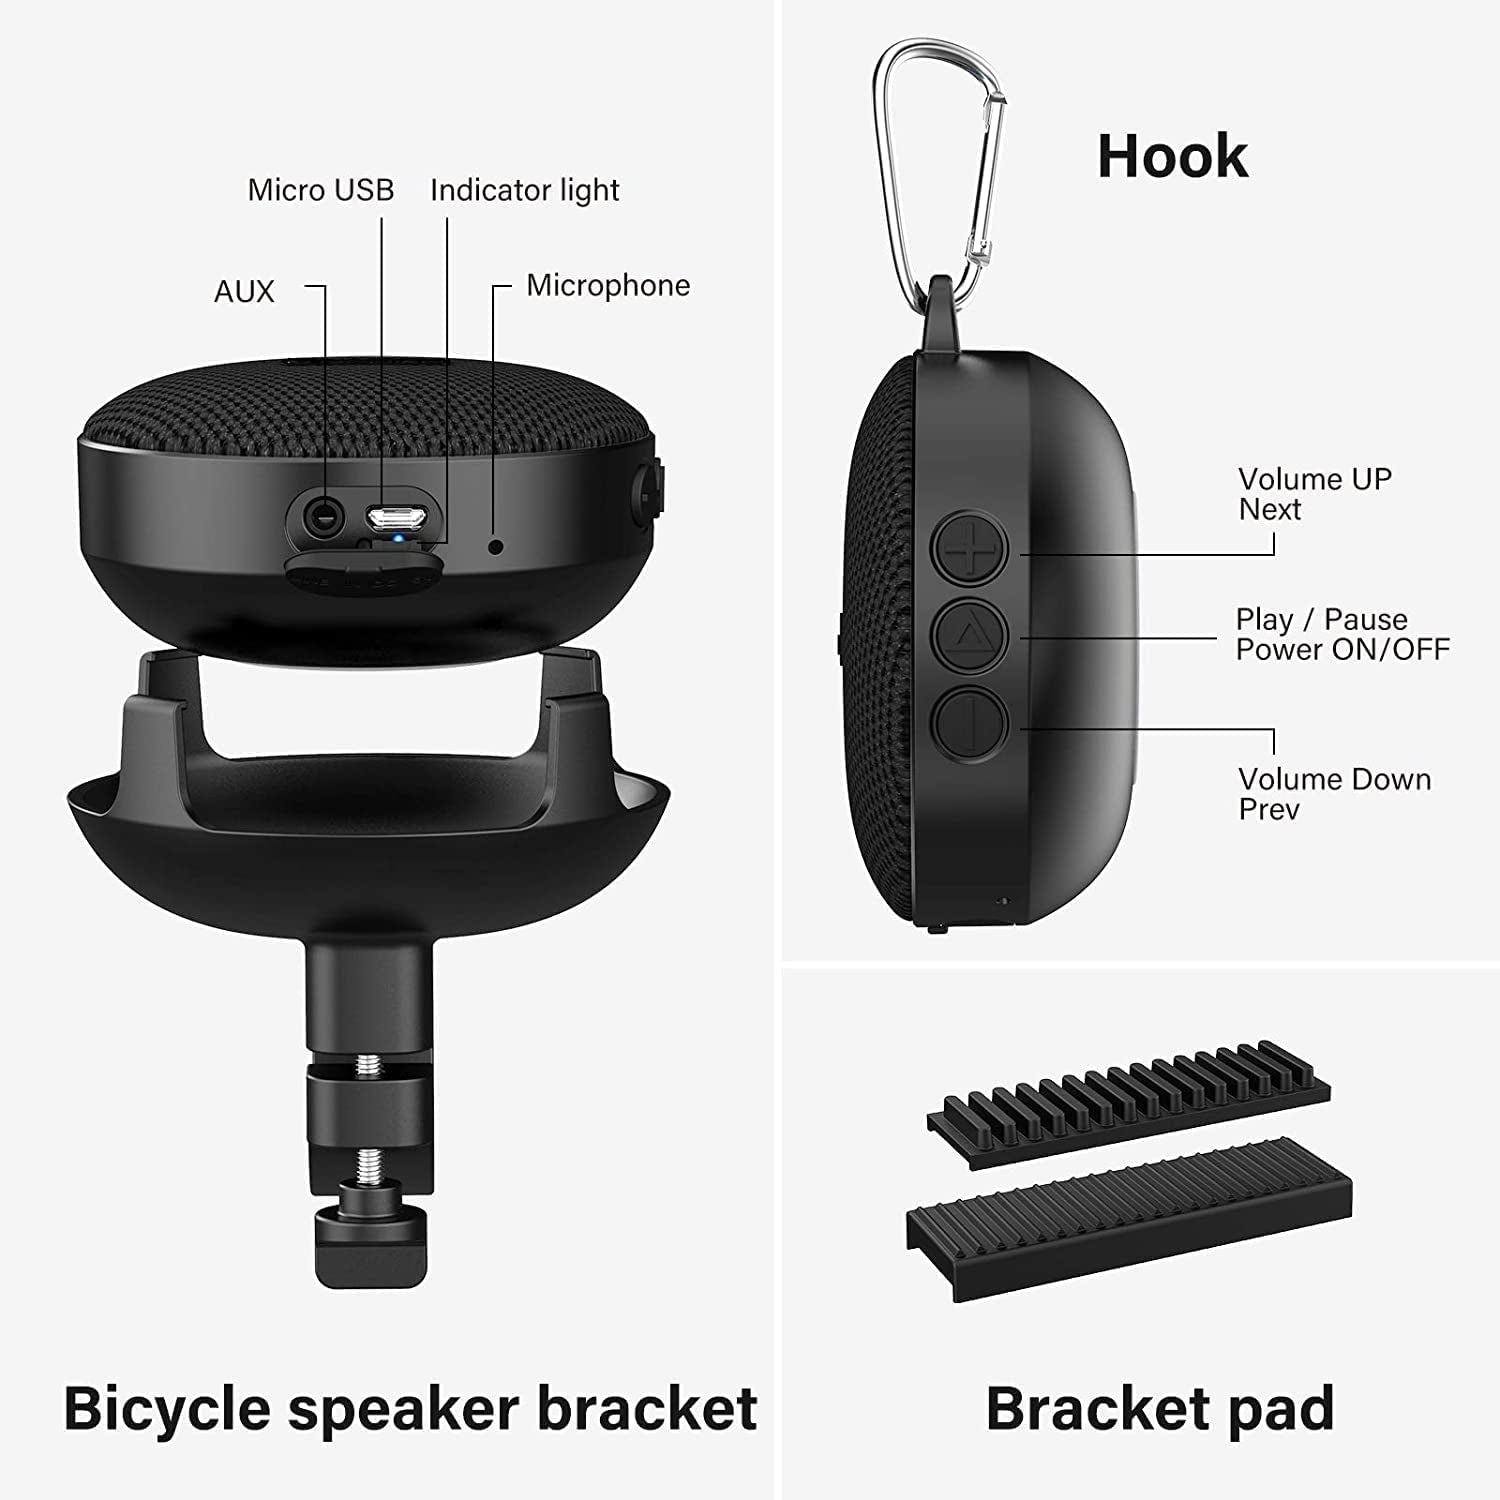  Portable Bluetooth Speaker for Bike, IP65 Waterproof & Dustproof Mini Outdoor Speaker, Bluetooth 5.0 and 10h Play Time, Wireless Bicycle Speaker with Loud Sound for Riding, Hiking and Camping